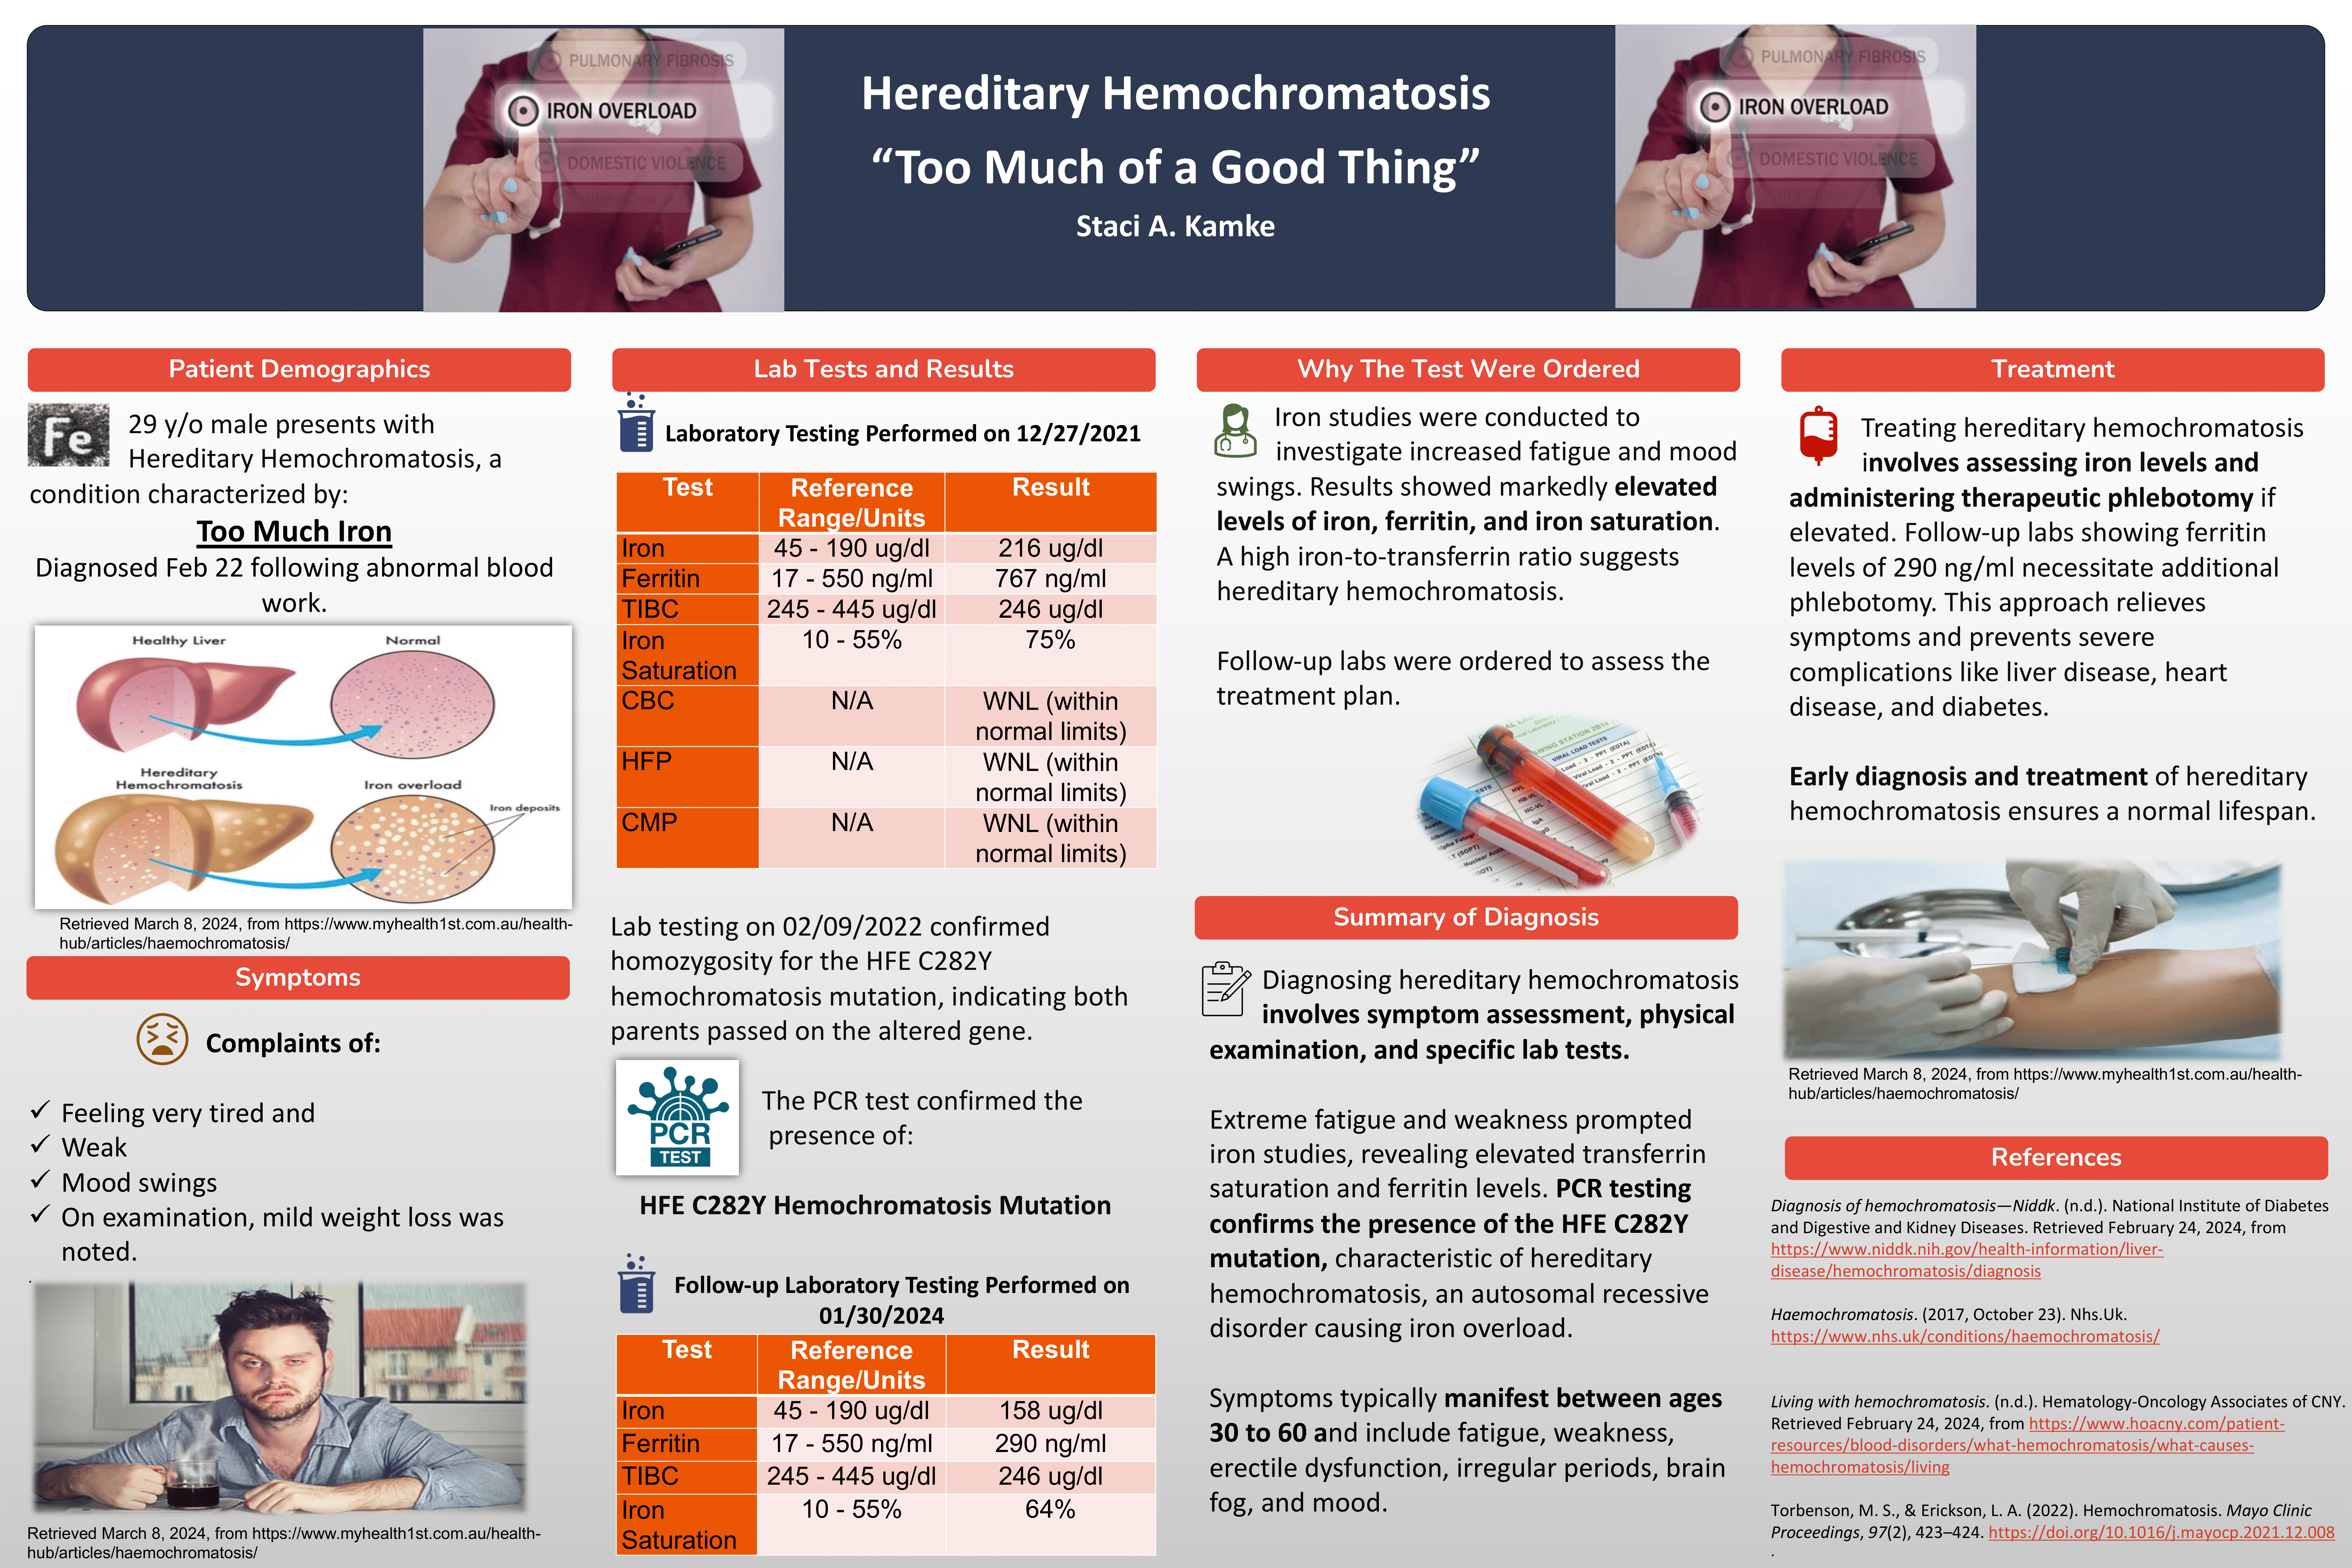 Hereditary Hemochromatosis - Too Much of a Good Thing poster by Staci Kamke